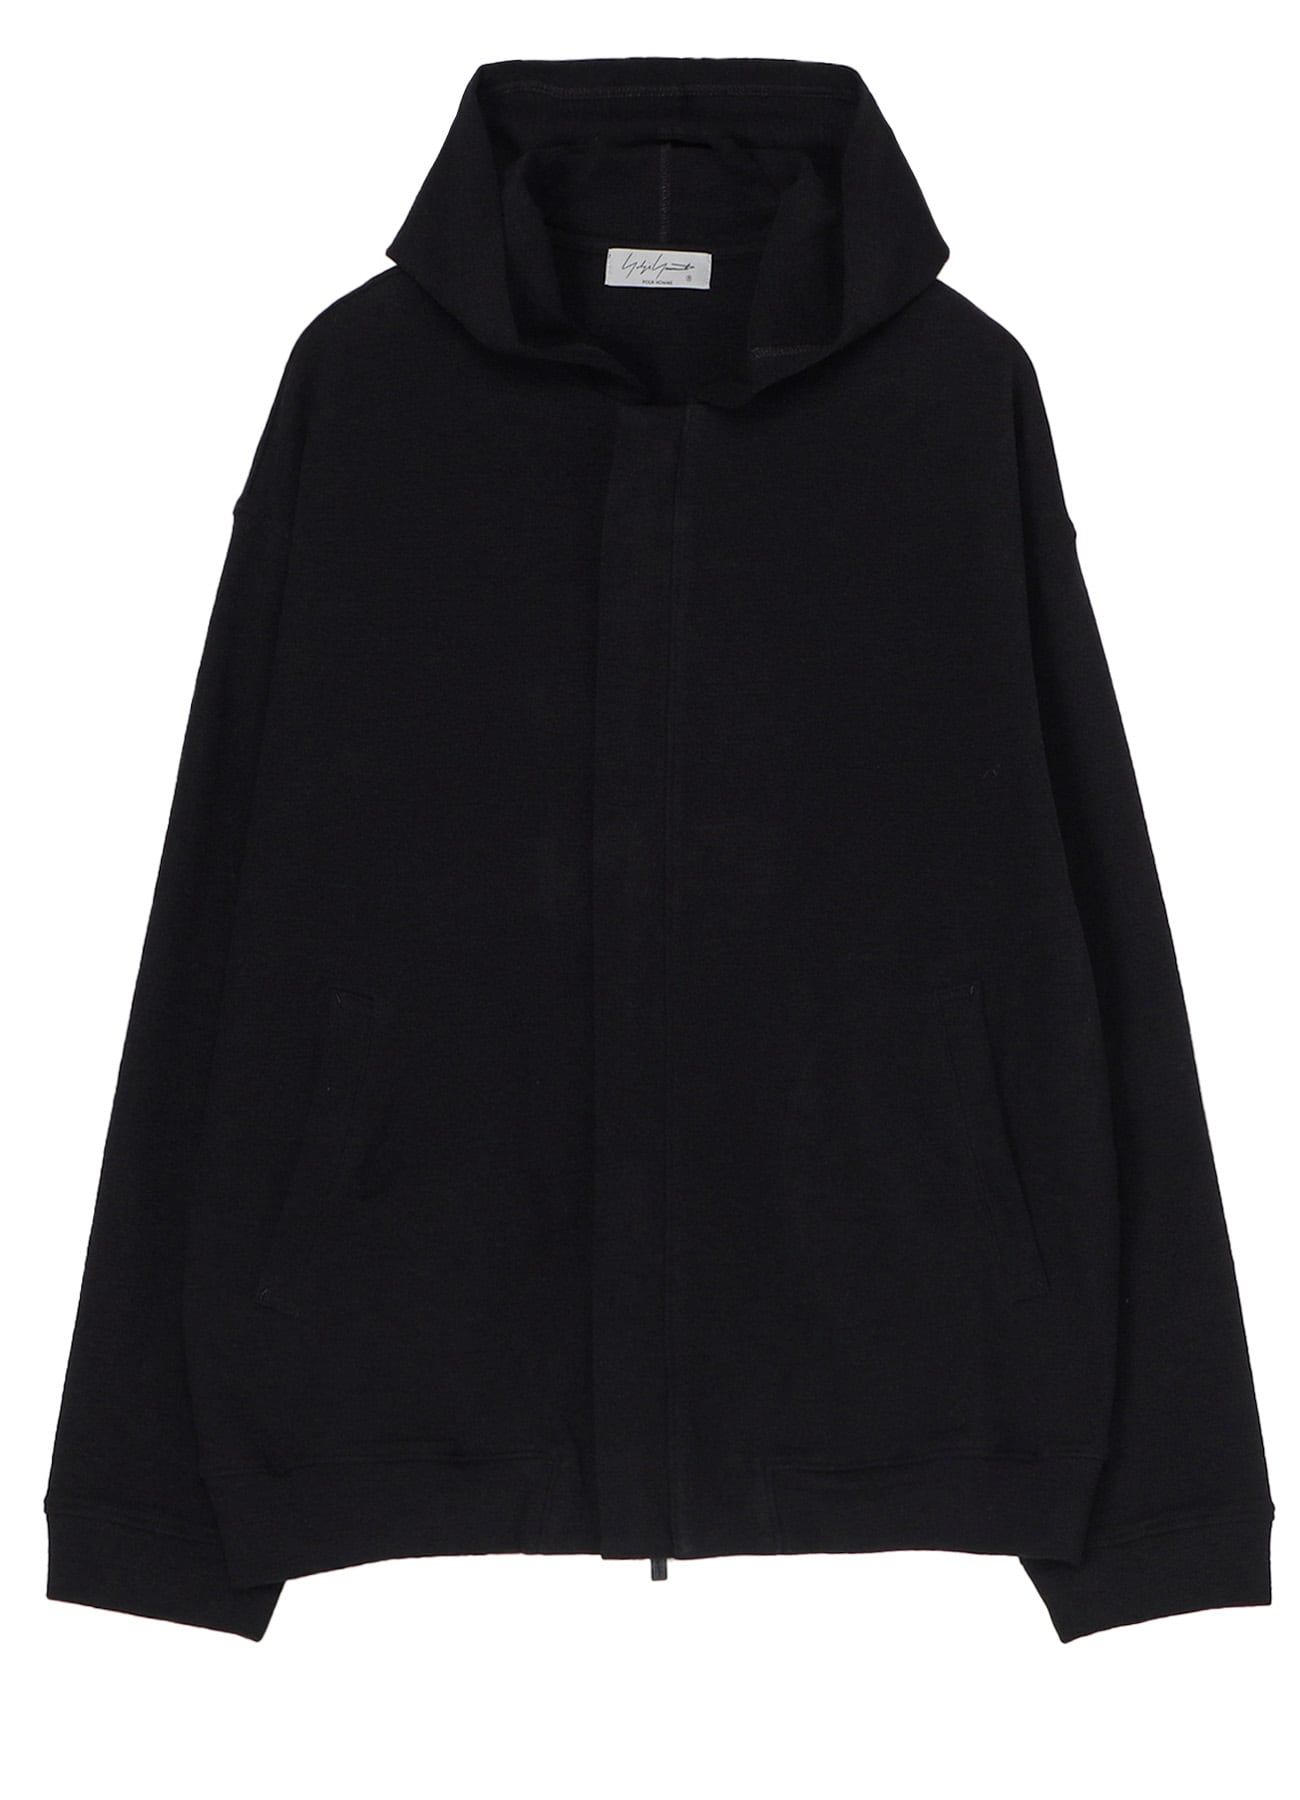 HIGHLAND JERSEY FRONT OPEN HOODIE